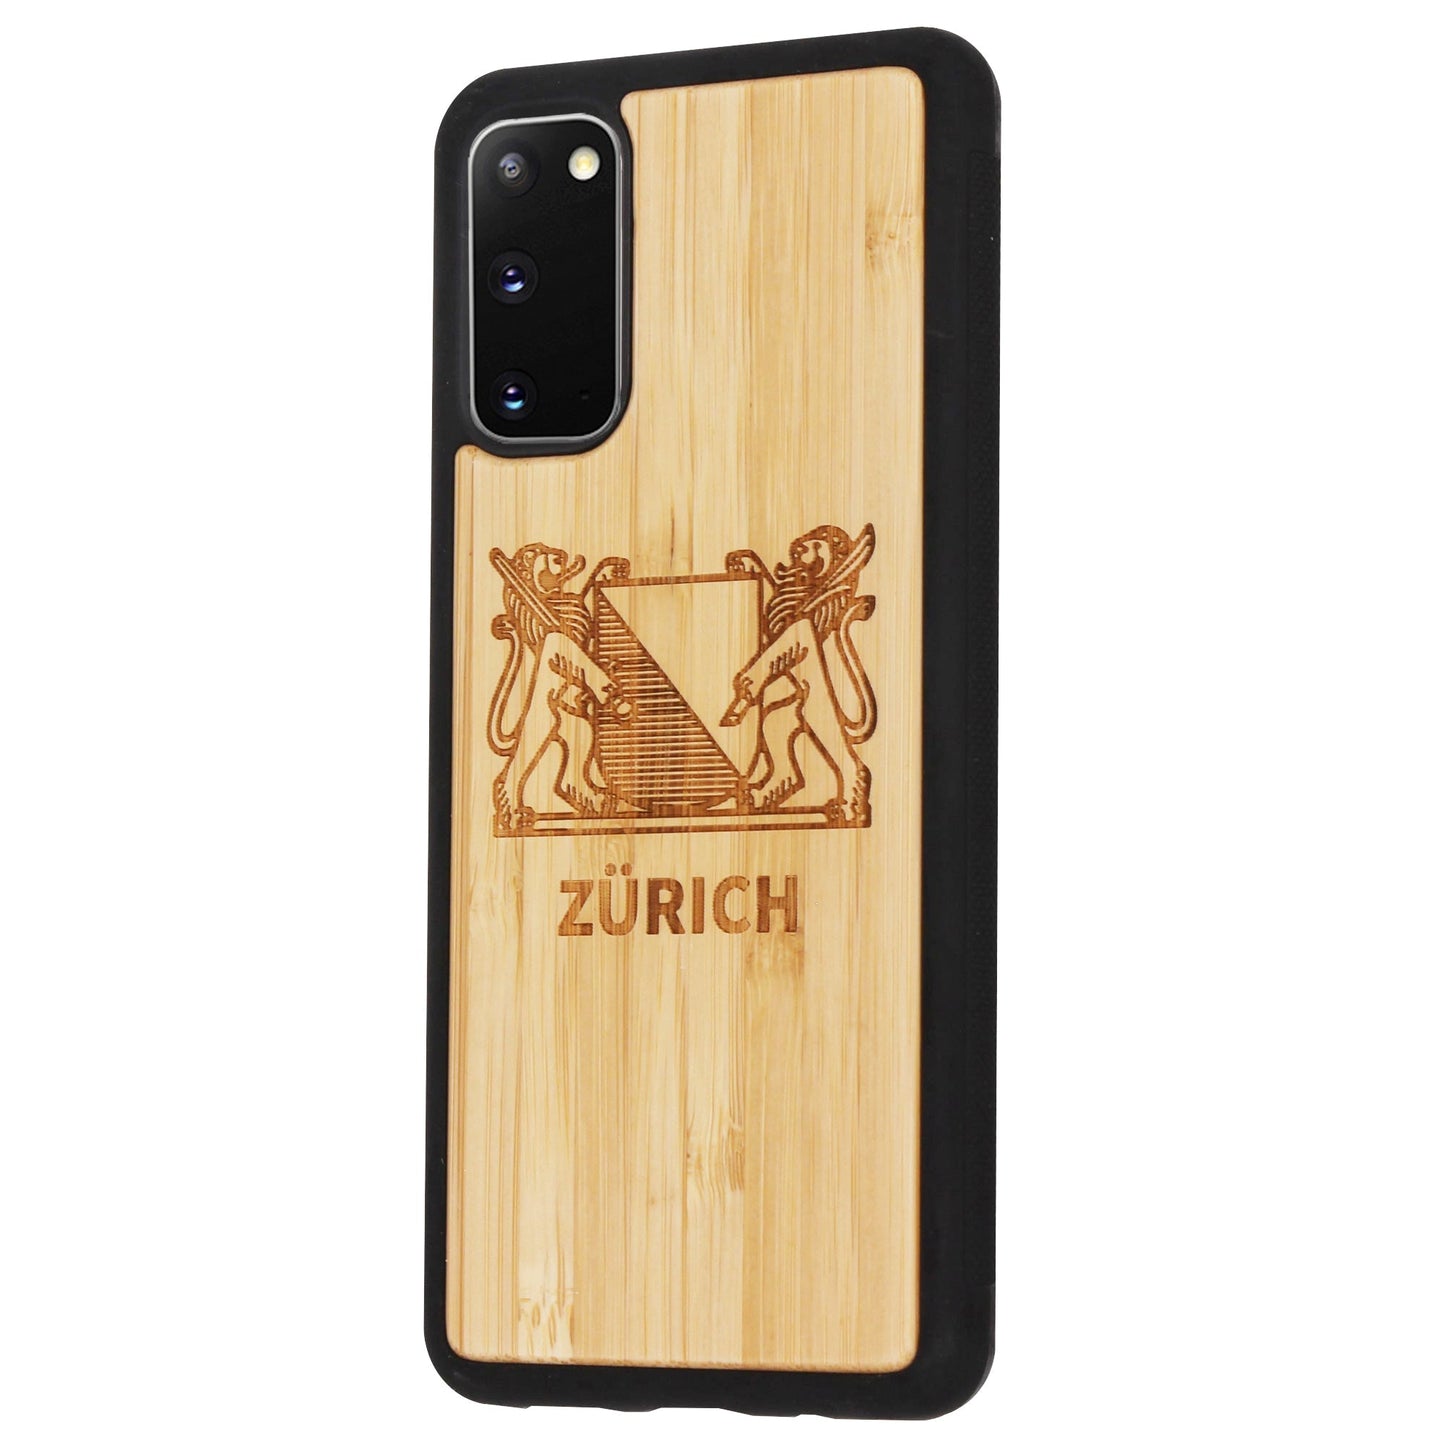 Zurich Coat of Arms Eden Bamboo Case for Samsung Galaxy S20